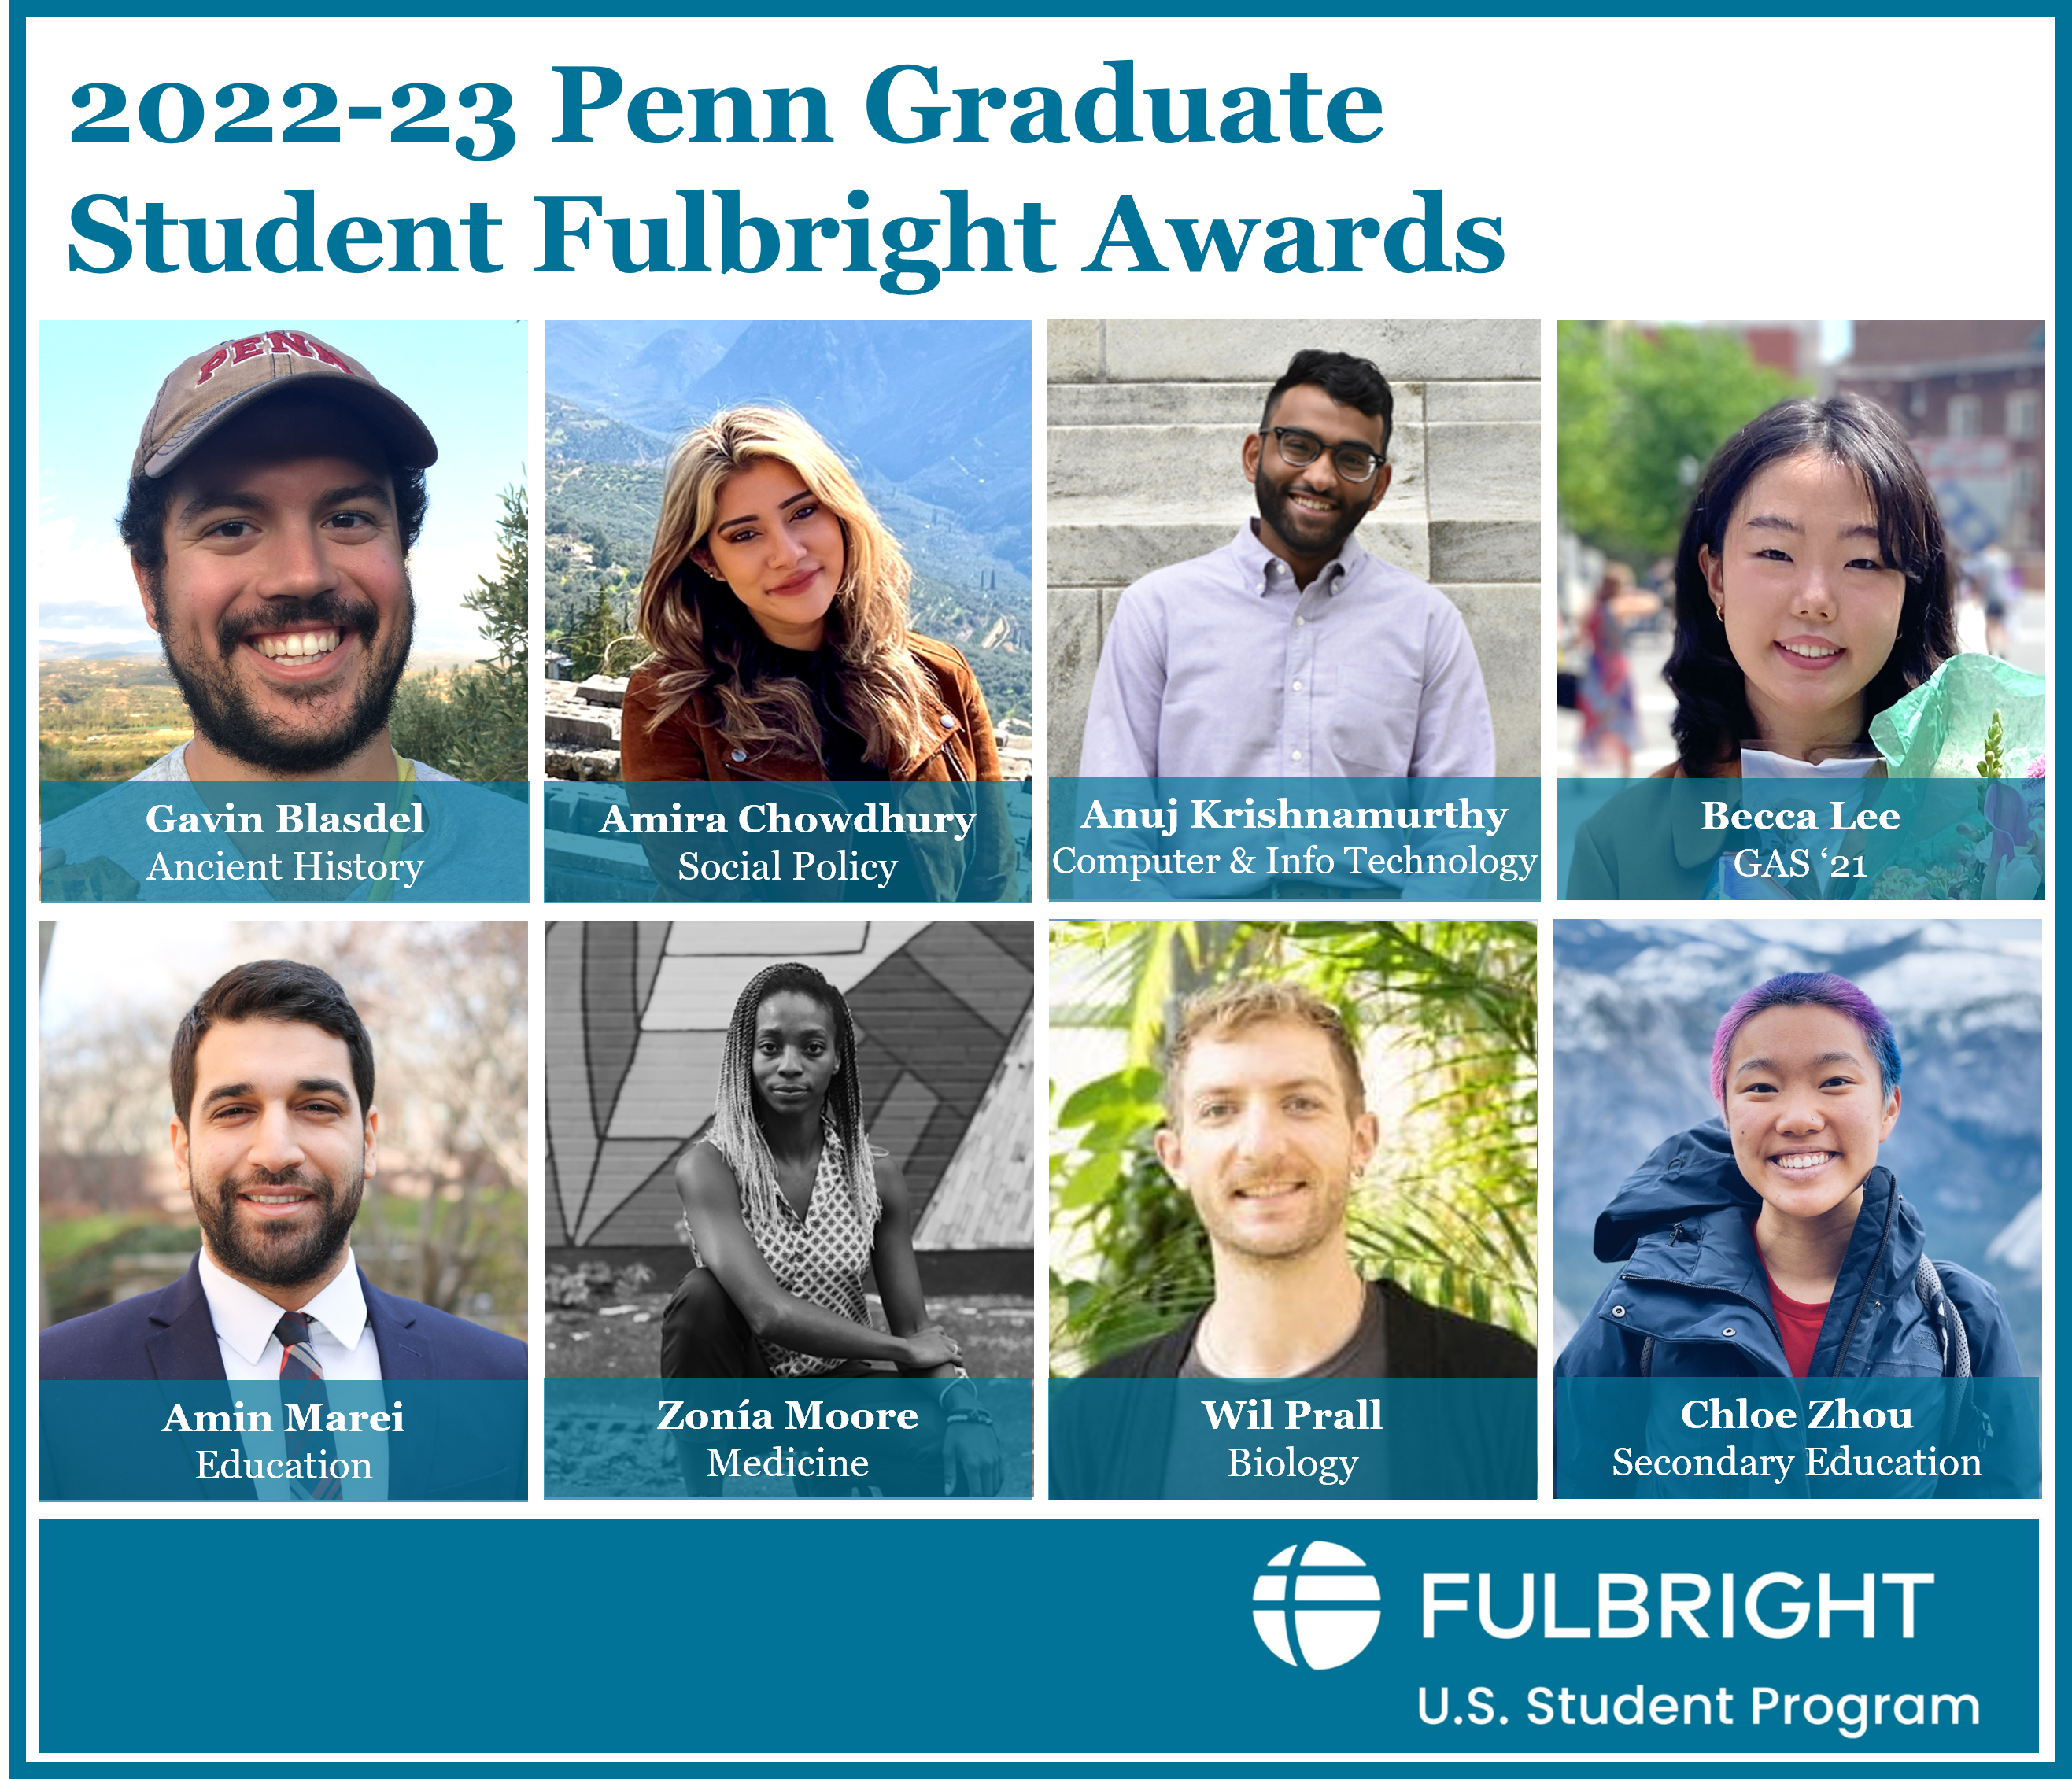 Photo collage of Penn grad Fulbright recipients with text: 2022-23 Penn Graduate Student Fulbright Awards